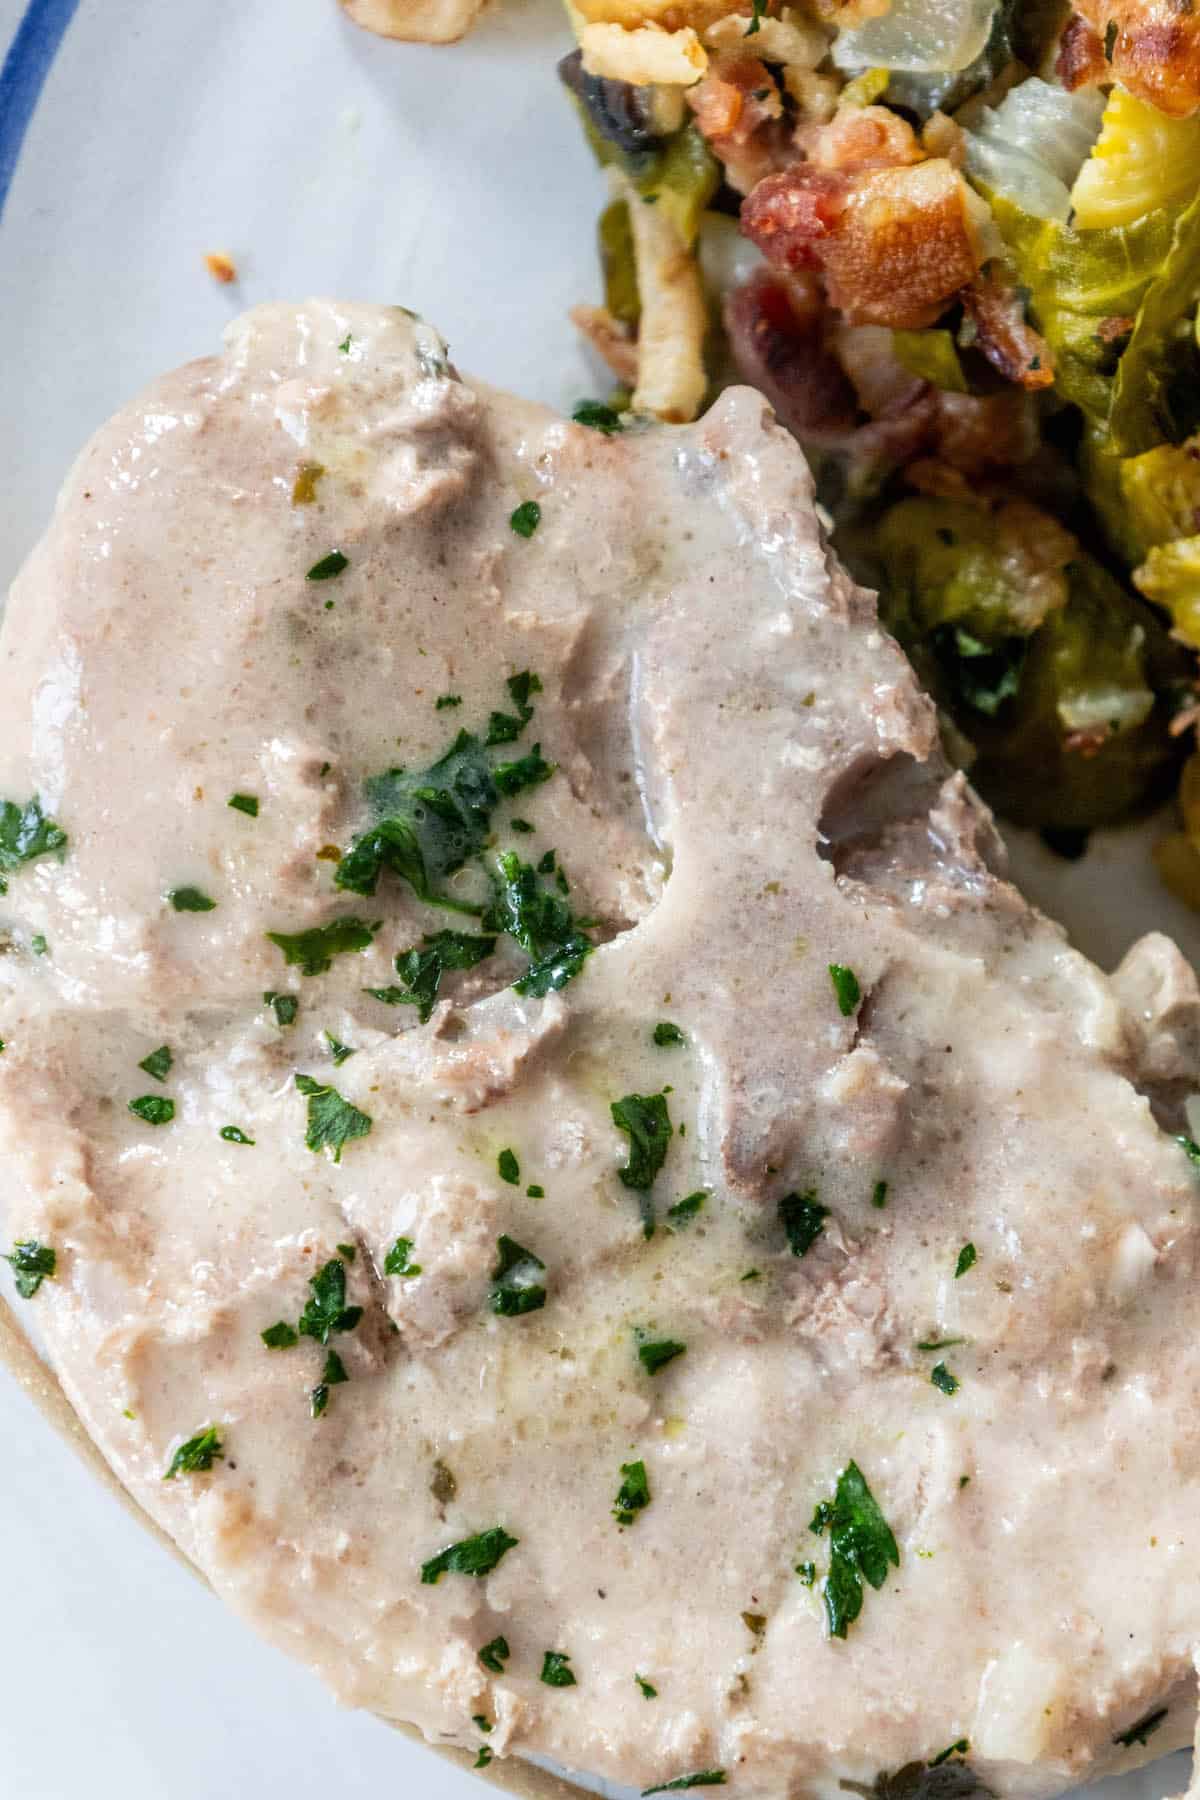 Creamy pork chops with gravy and brussels sprouts on a plate.